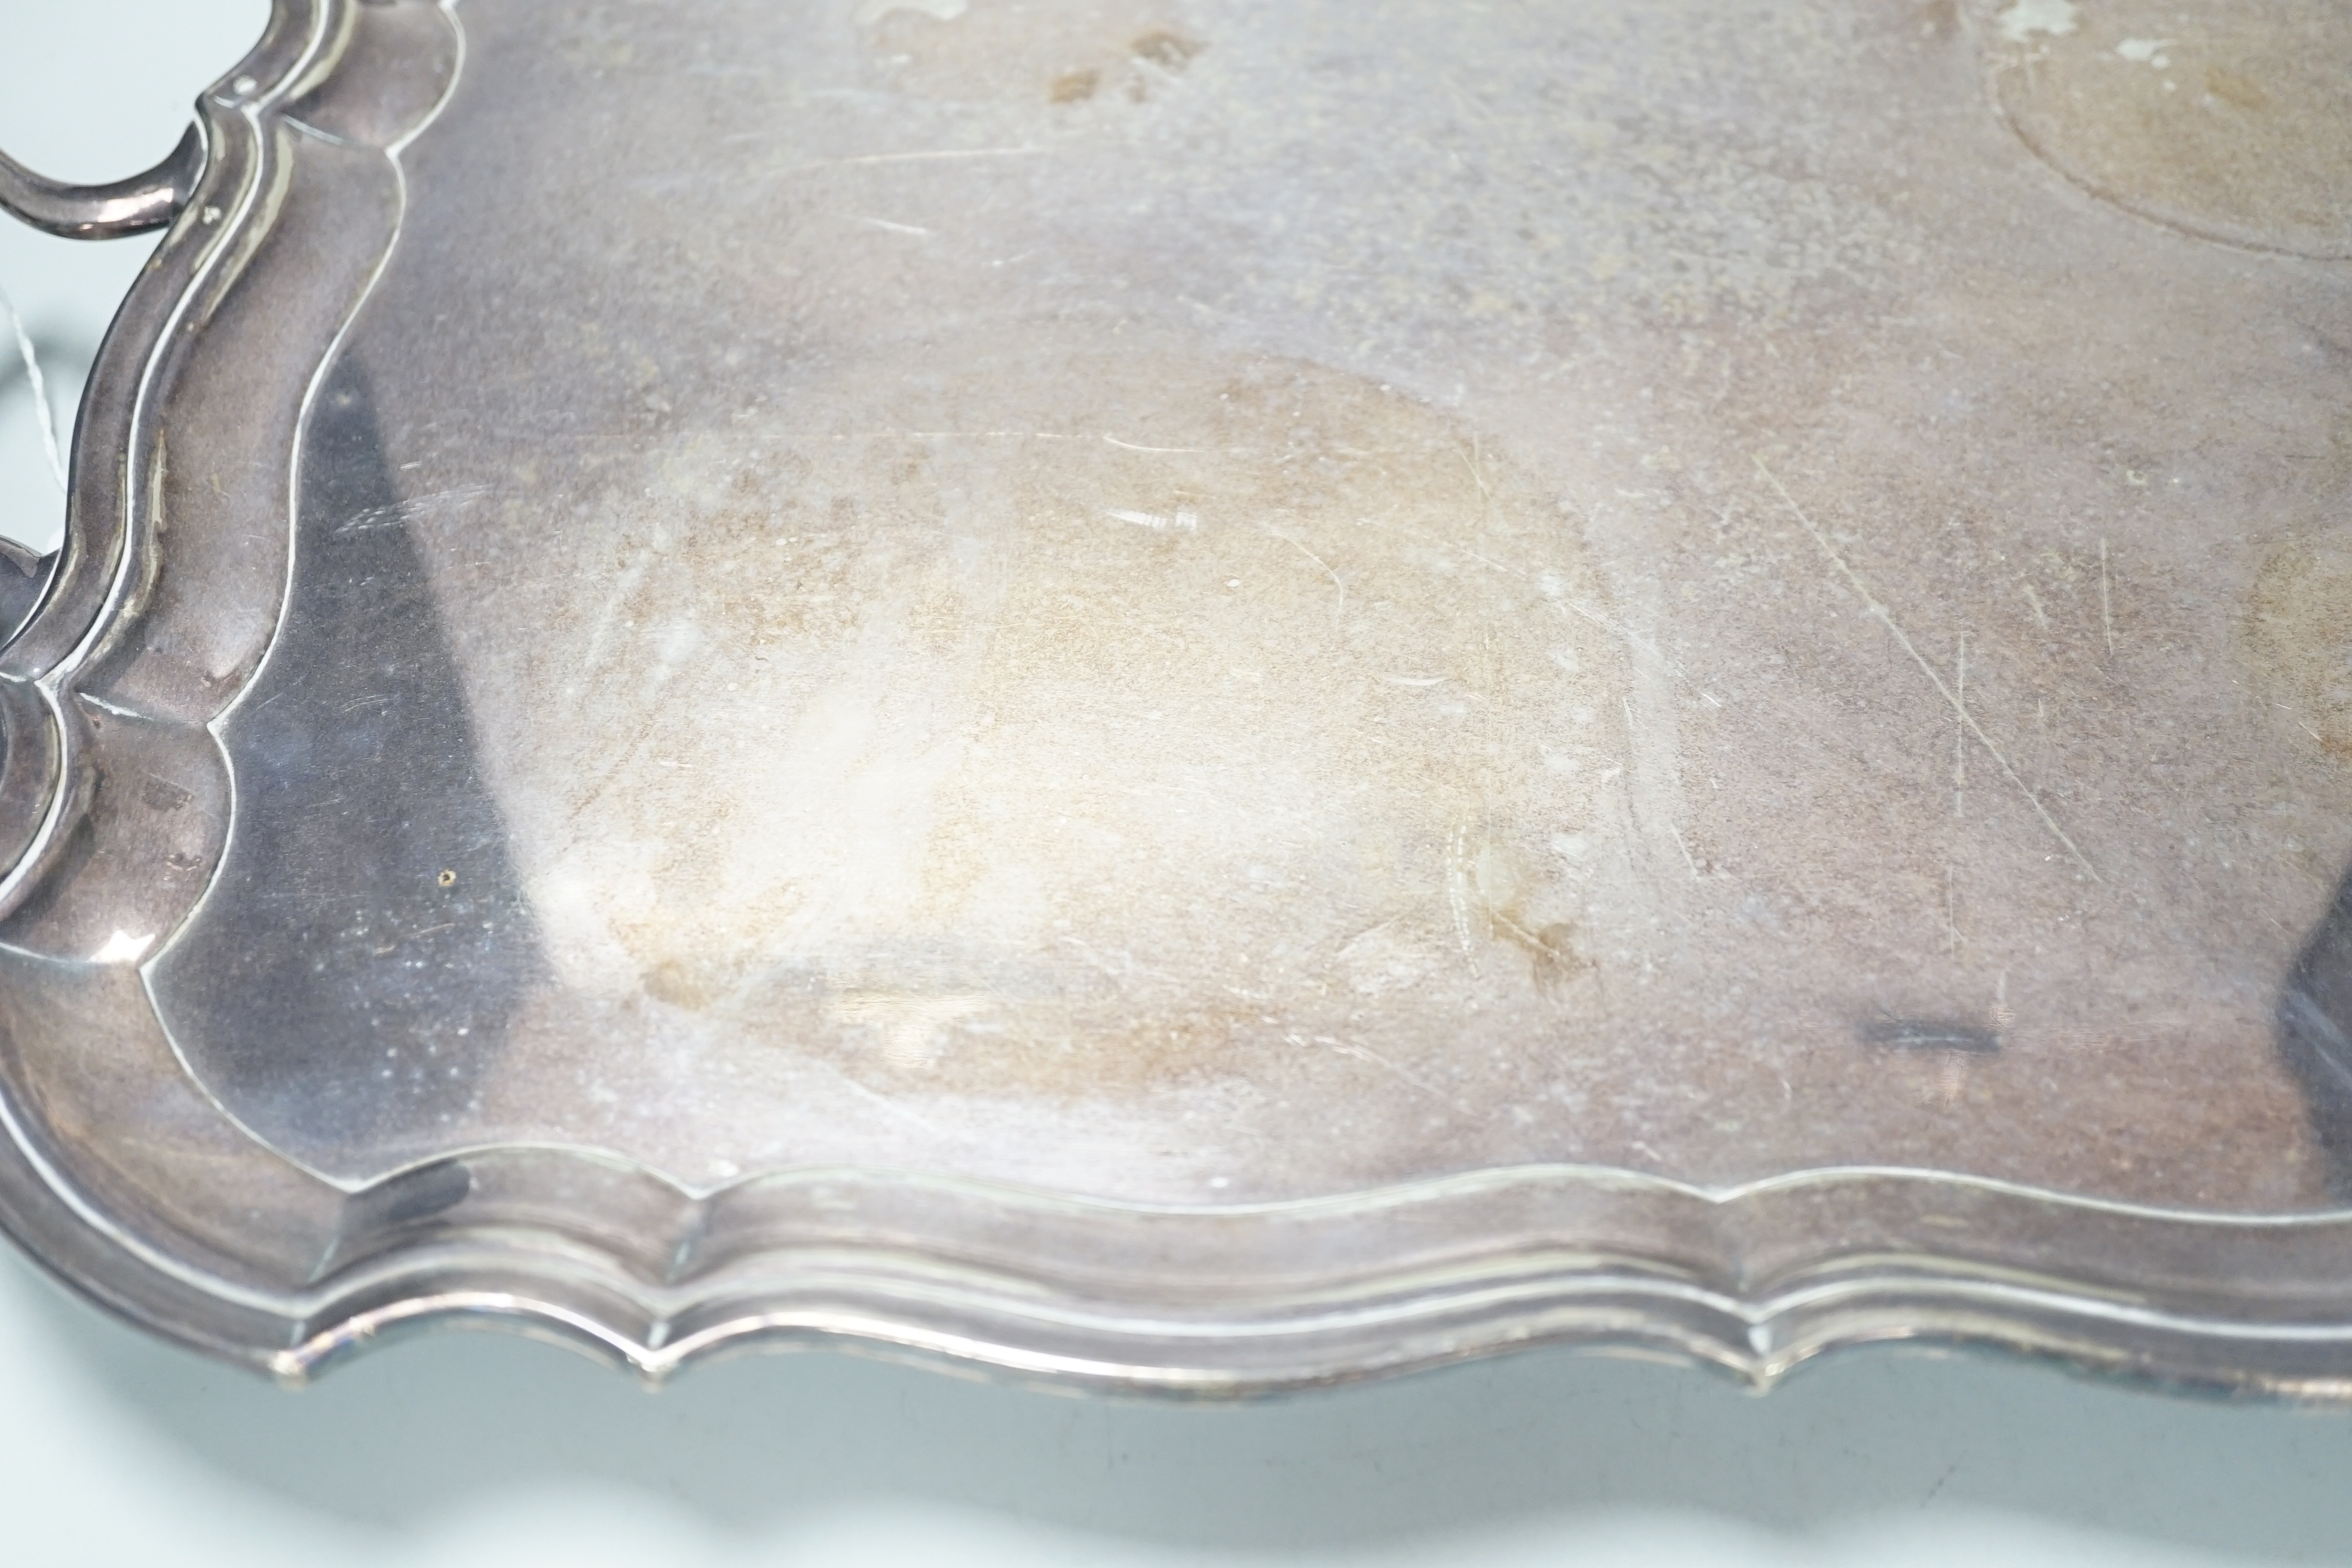 A silver plated two handled tray, 56cm wide